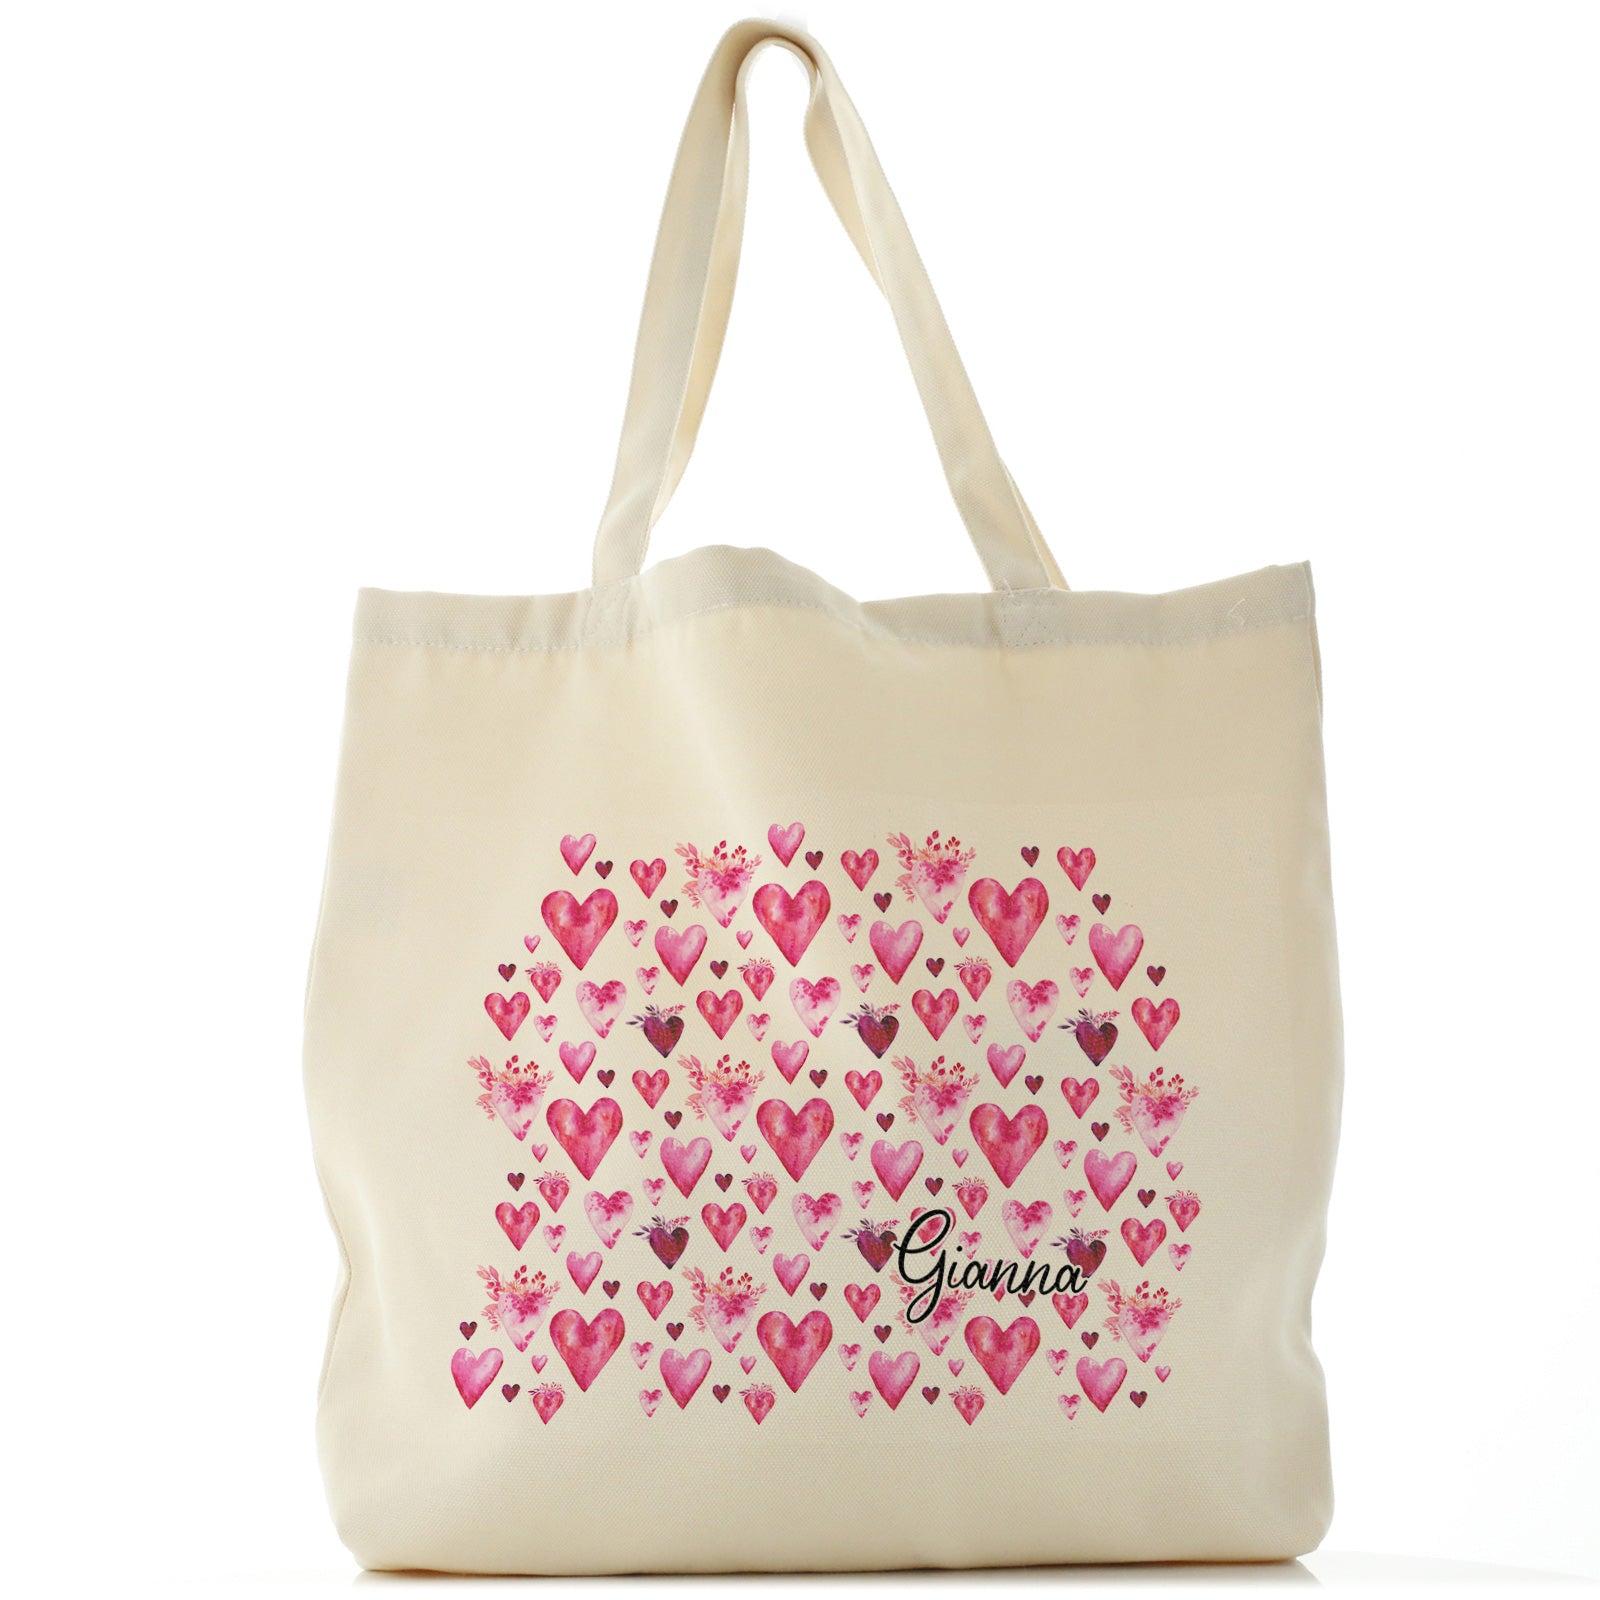 Personalised Tote Bag with Stylish Text and Valentine Hearts Print